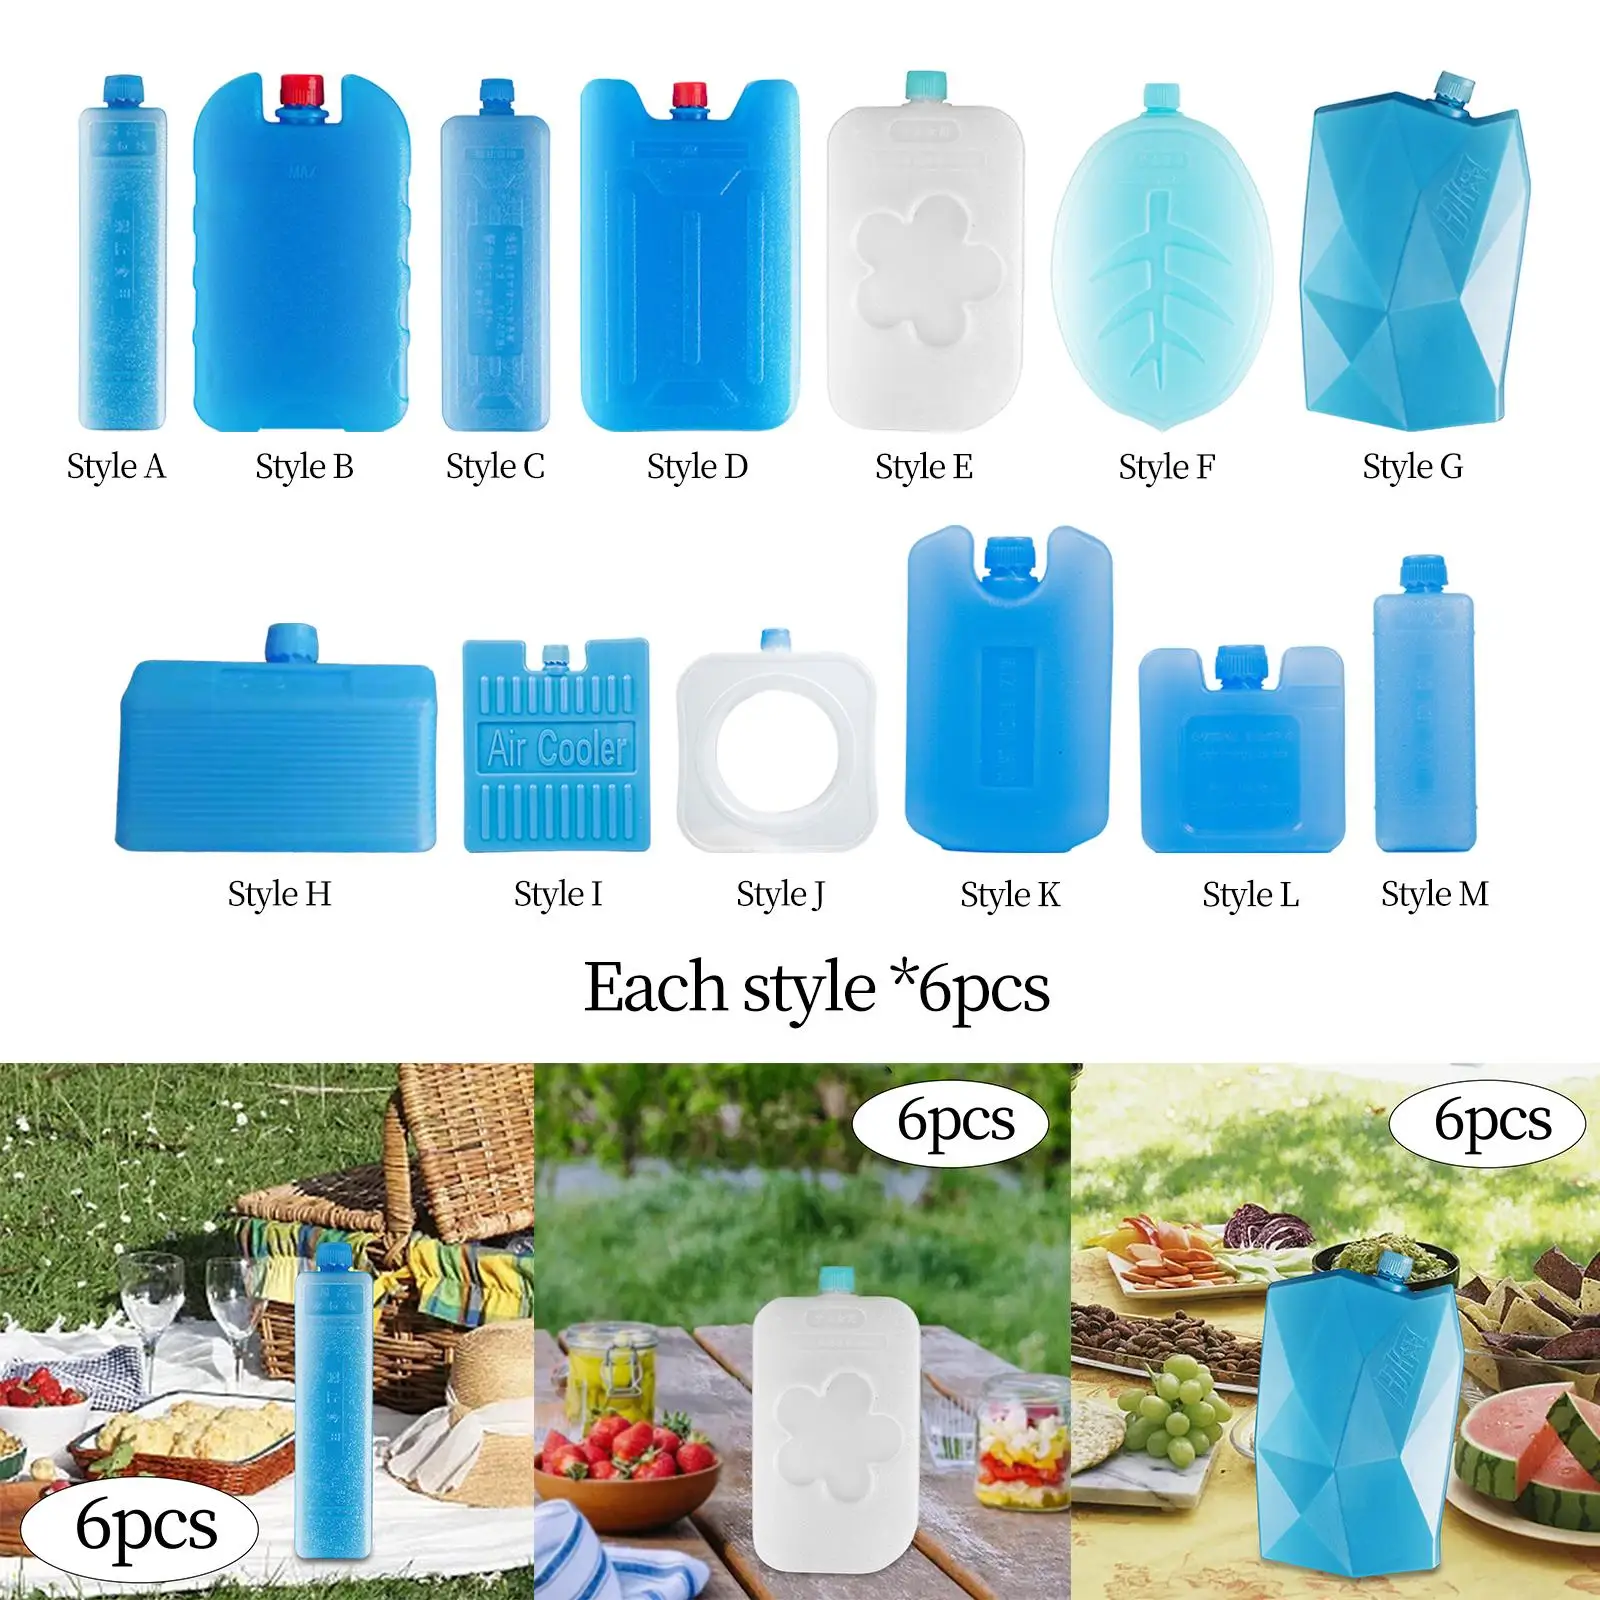 6x Ice Cooler Blocks for Travel Cool Box that Simply Stays Frozen Reusable Portable Durable Cooling Ice Packs for Picnic Travel